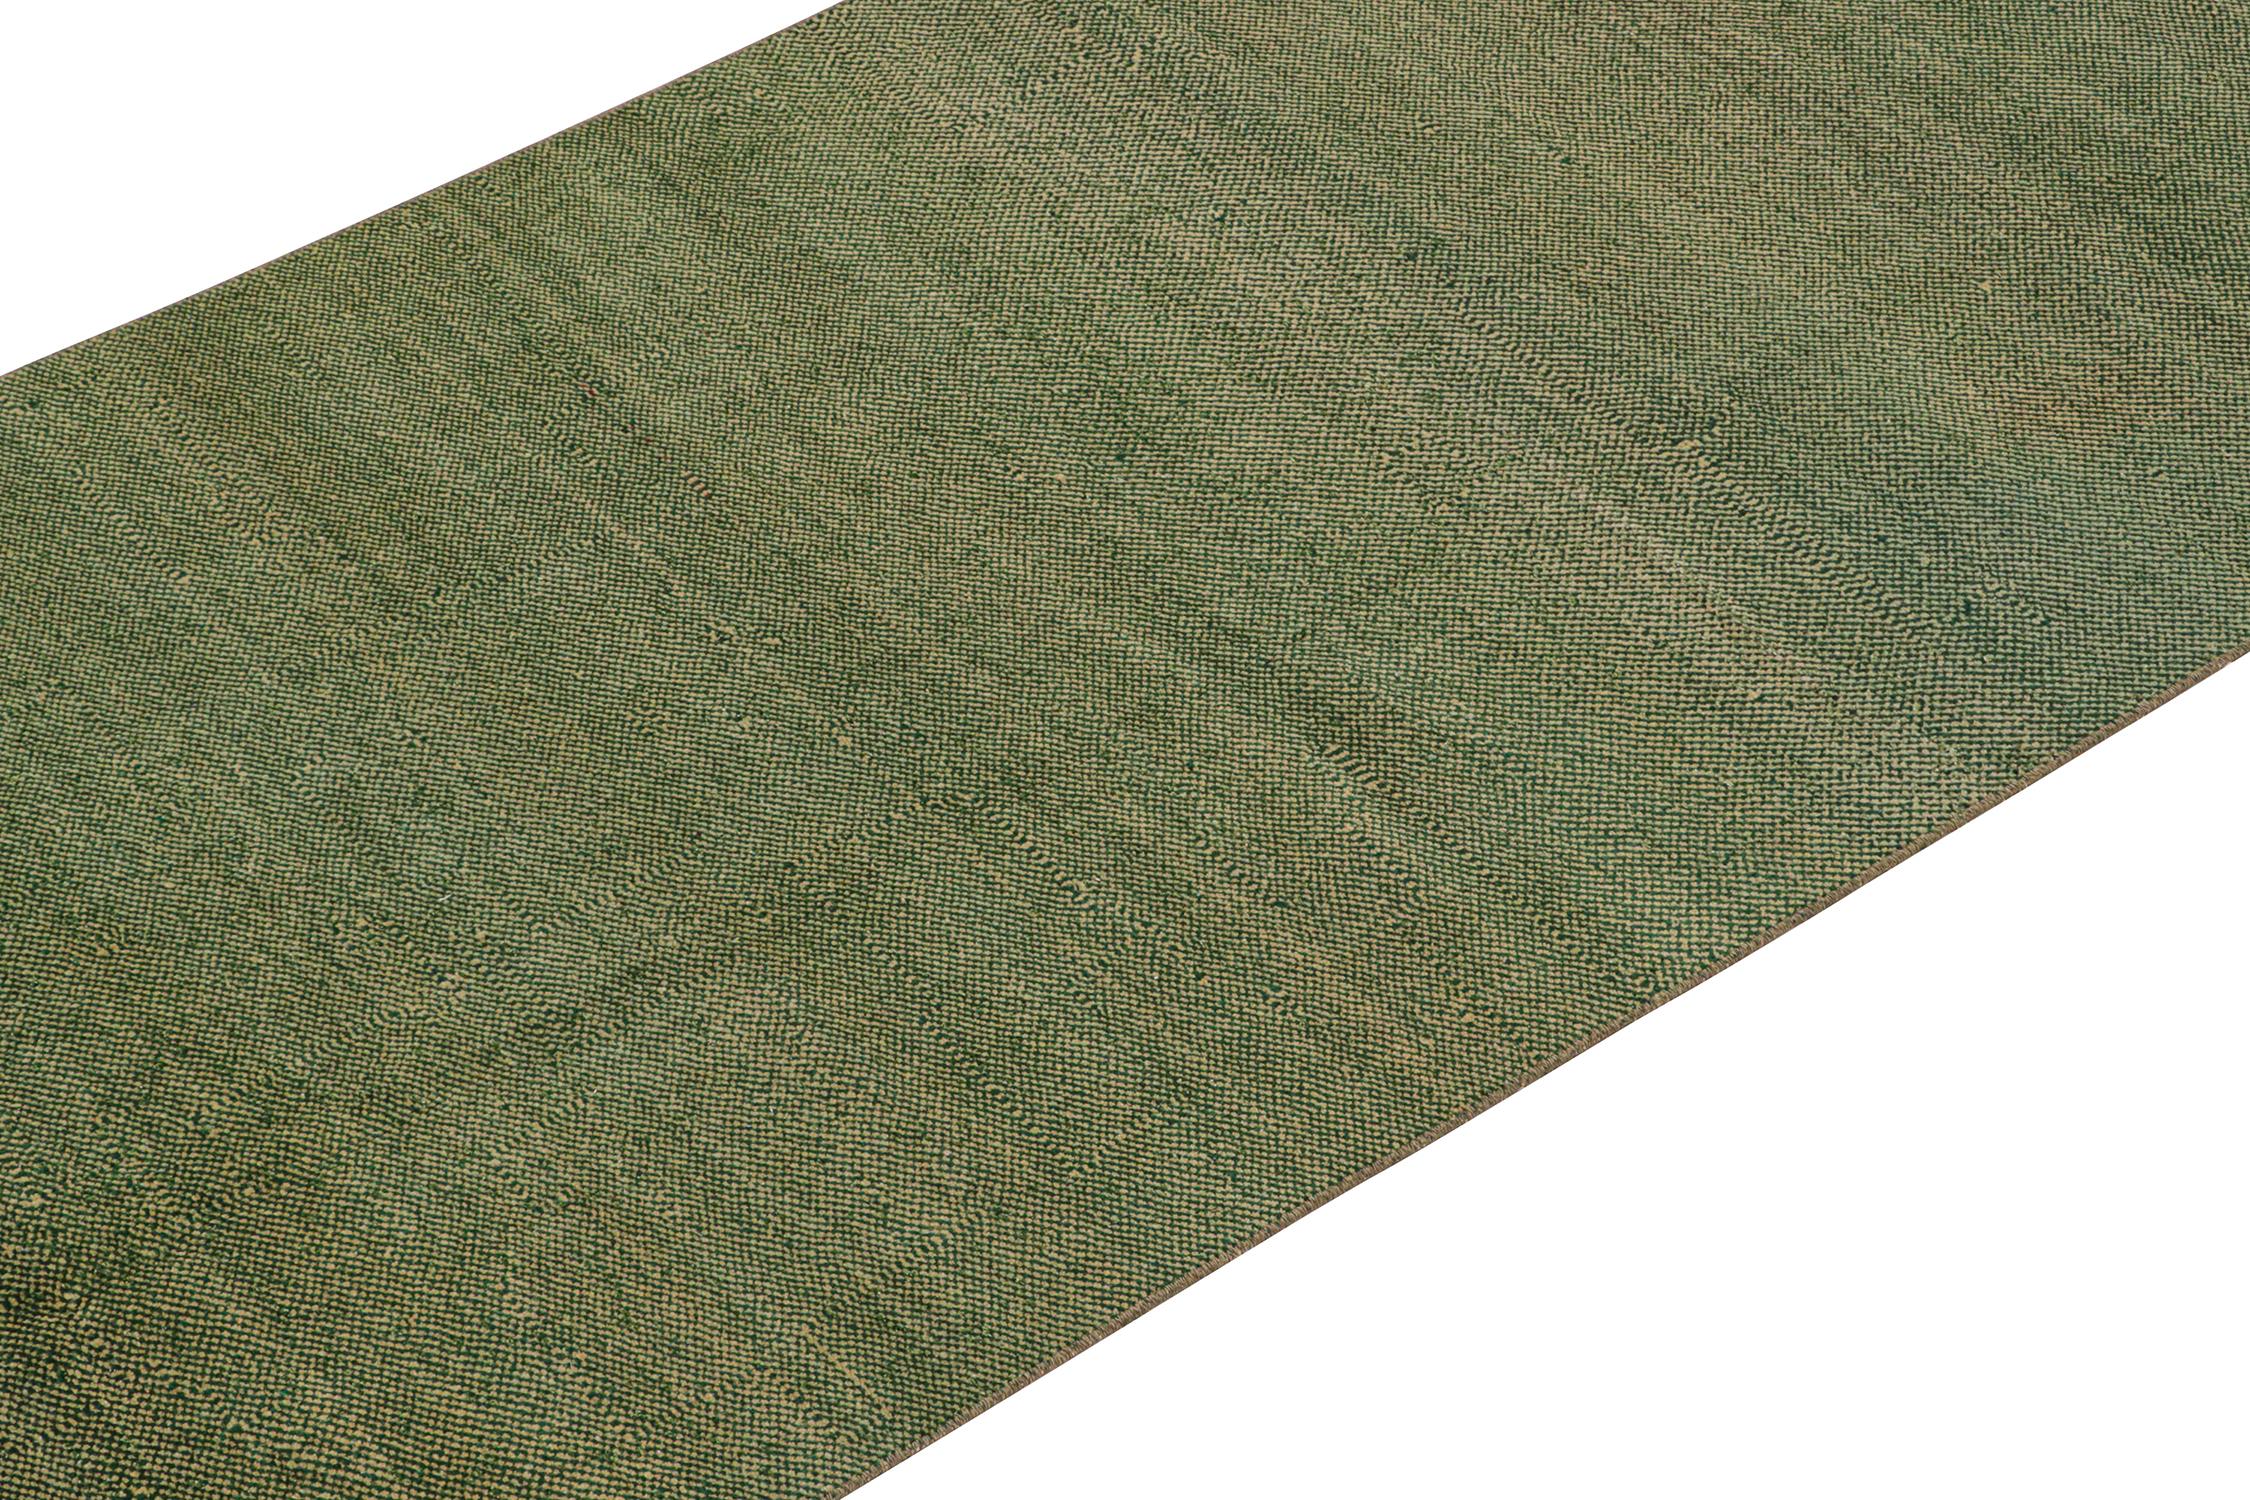 Turkish Vintage Midcentury Rug in Solid Green Tone-on-tone Striae by Rug & Kilim For Sale